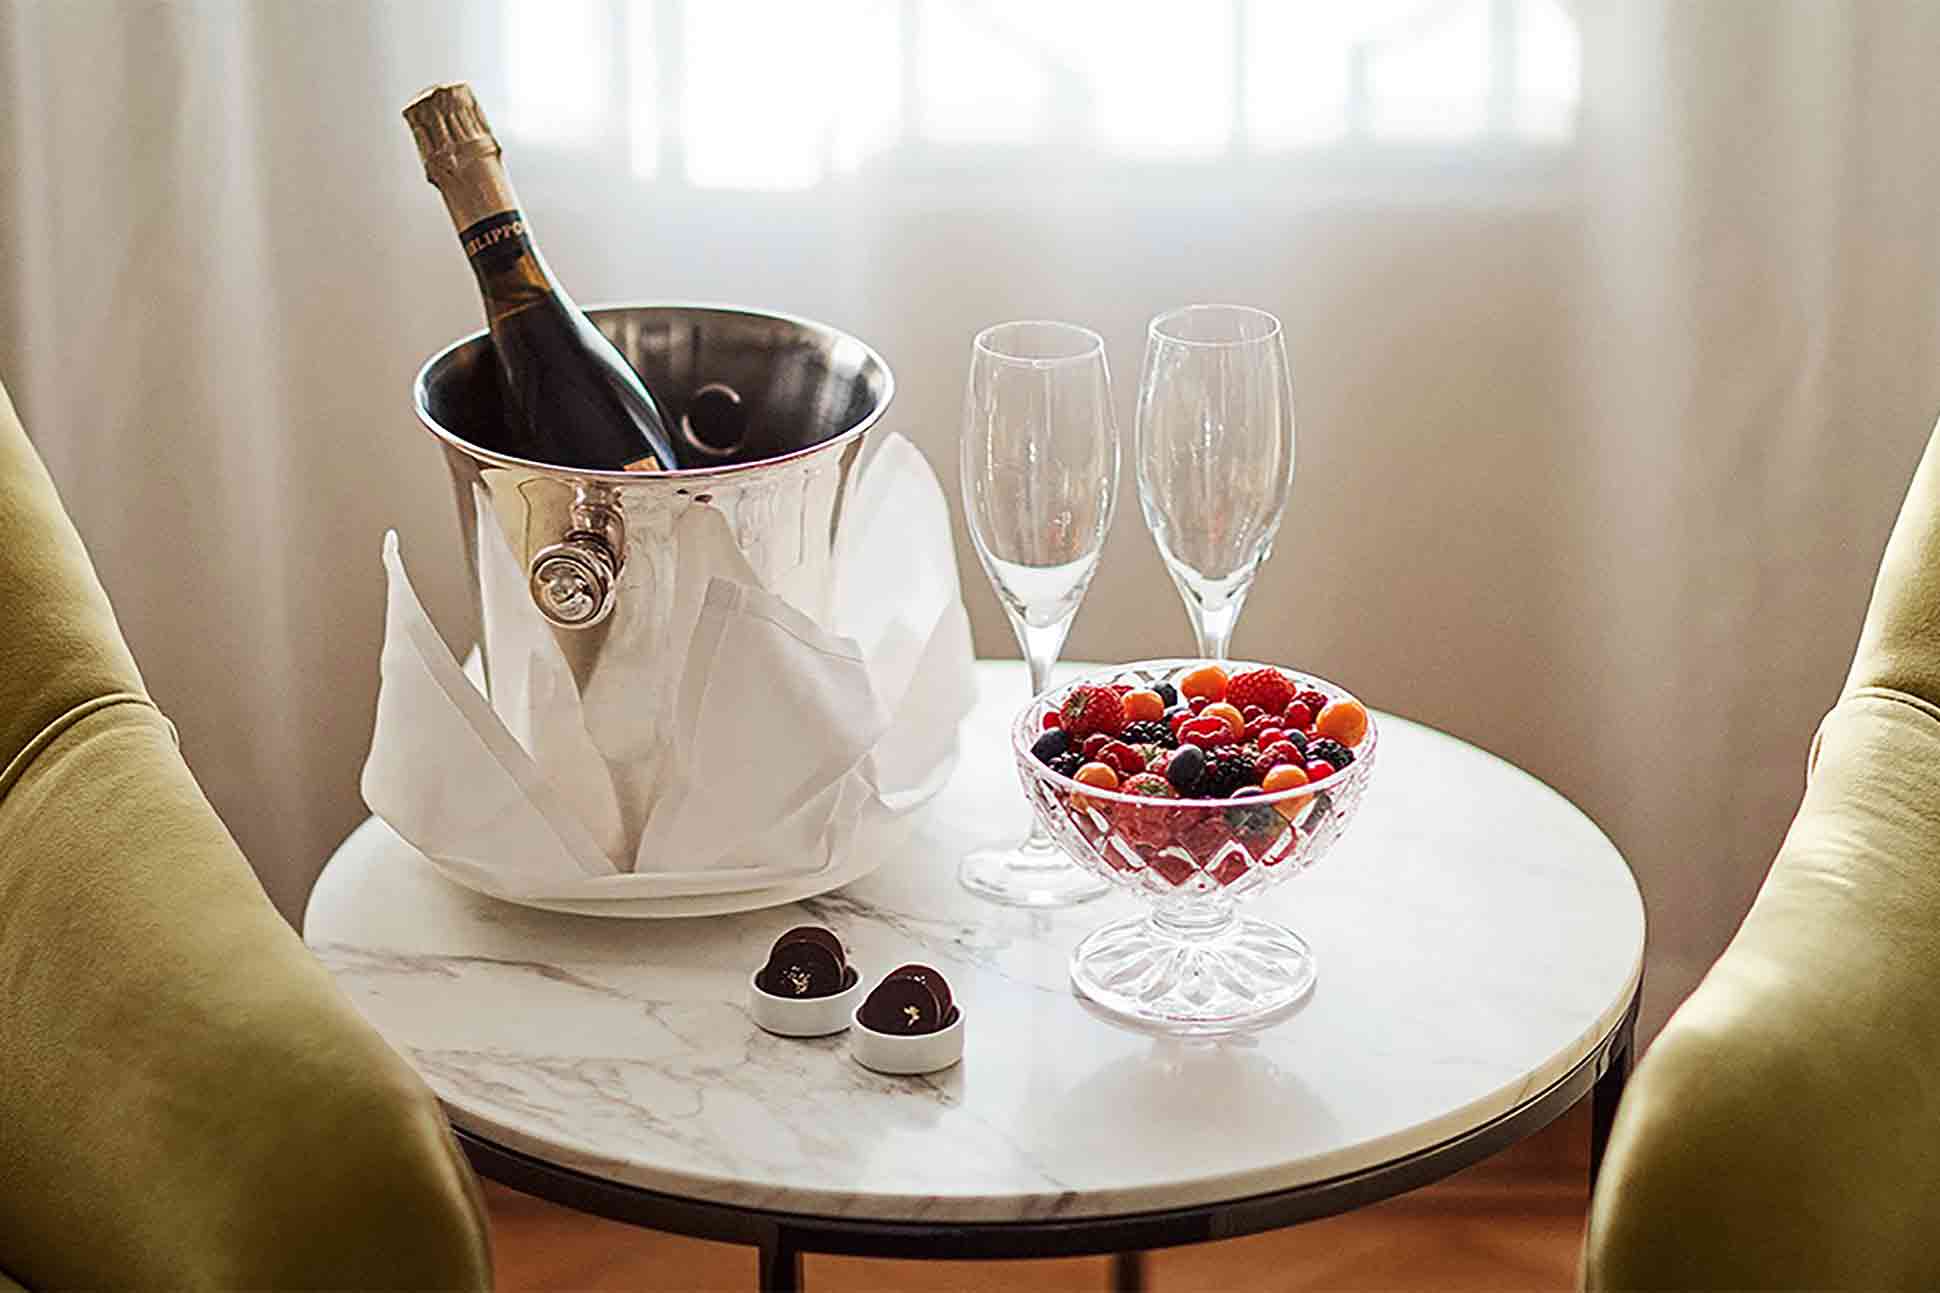 The Indulgence Gold Package at the Diplomat Hotel in Stockholm, Sweden, is a romantic treat.